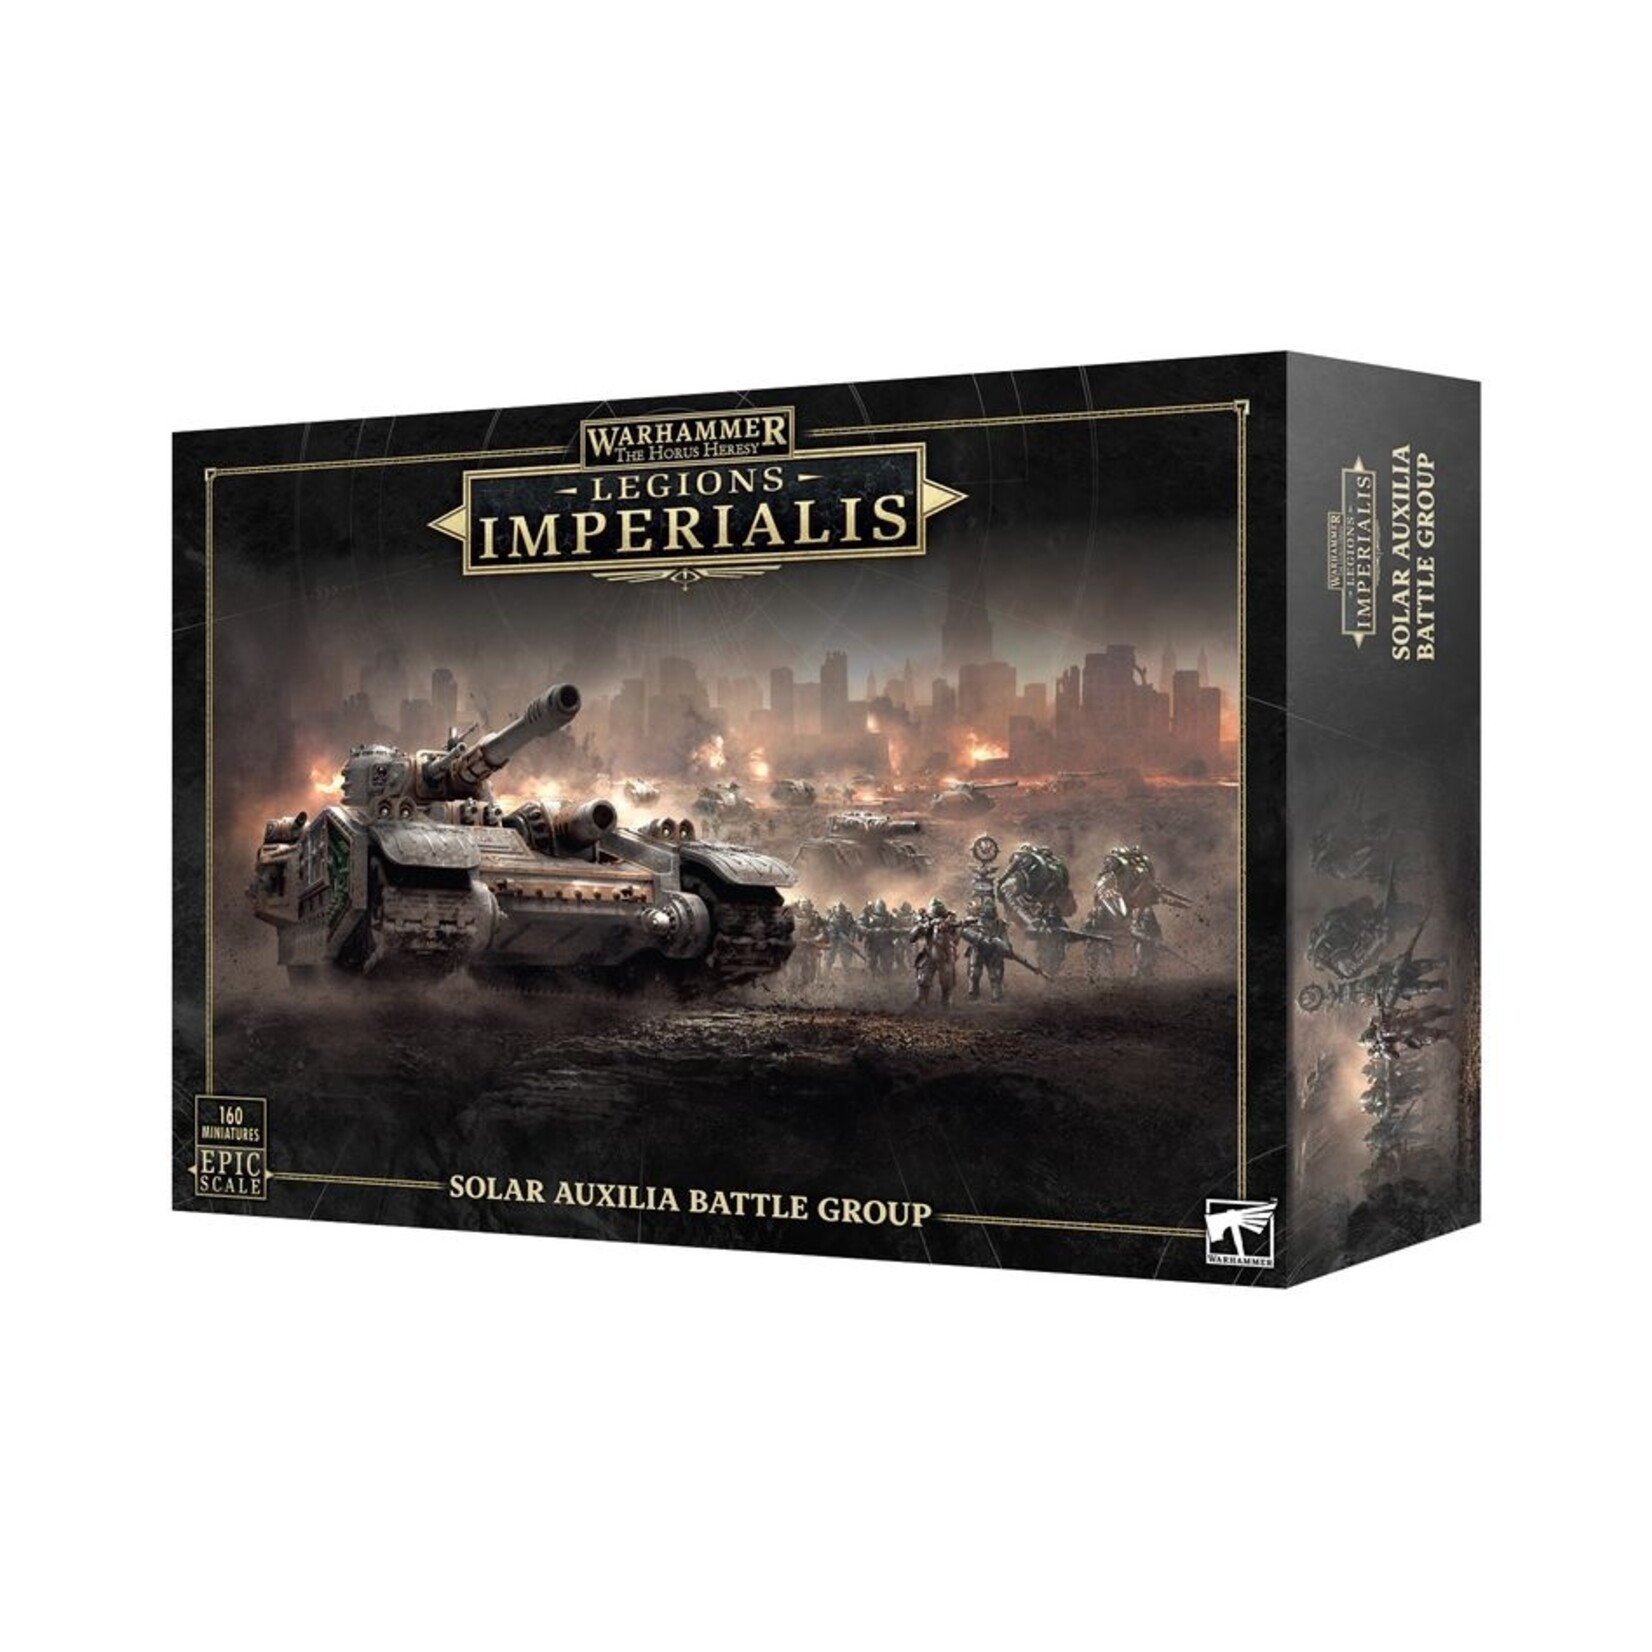 Warhammer: Legions Imperialis (Preorder: releases 29/06) Legions Imperialis: Solar Auxilia Battle Group